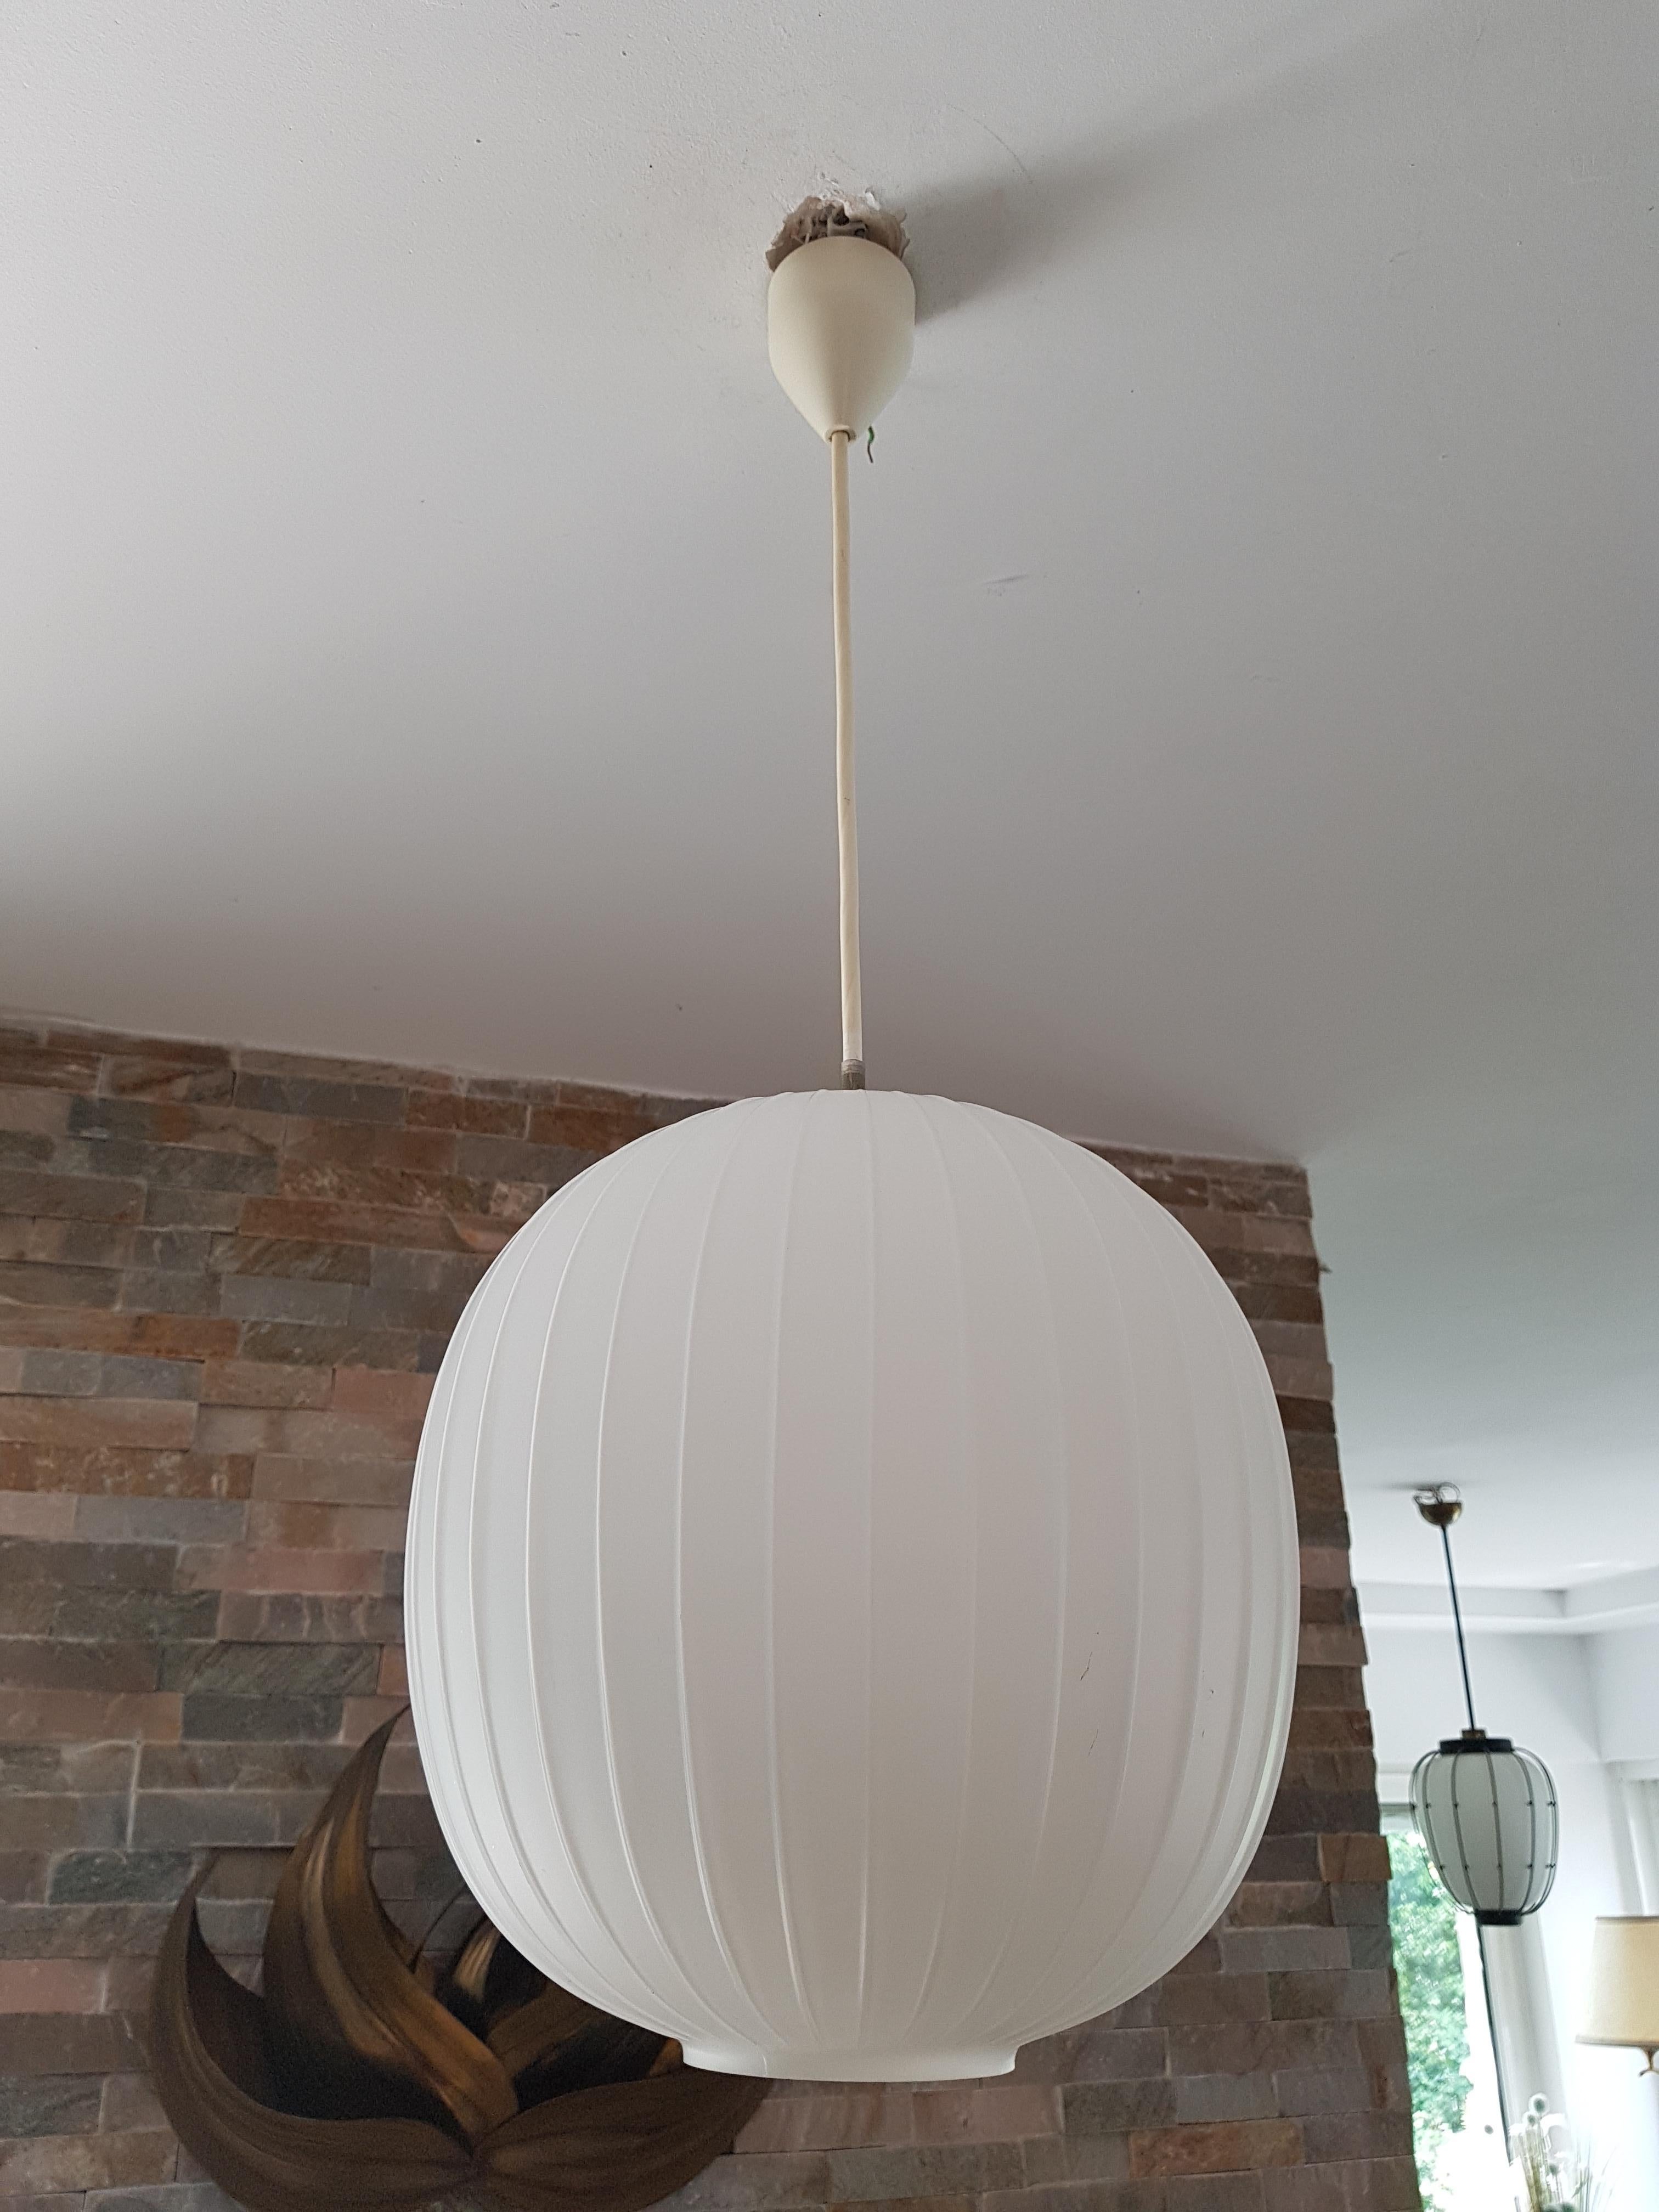 Mid-20th Century Midcentury Pendant Lamp Bologna by Gangkofner for Peill & Putzler, Germany, 1958 For Sale